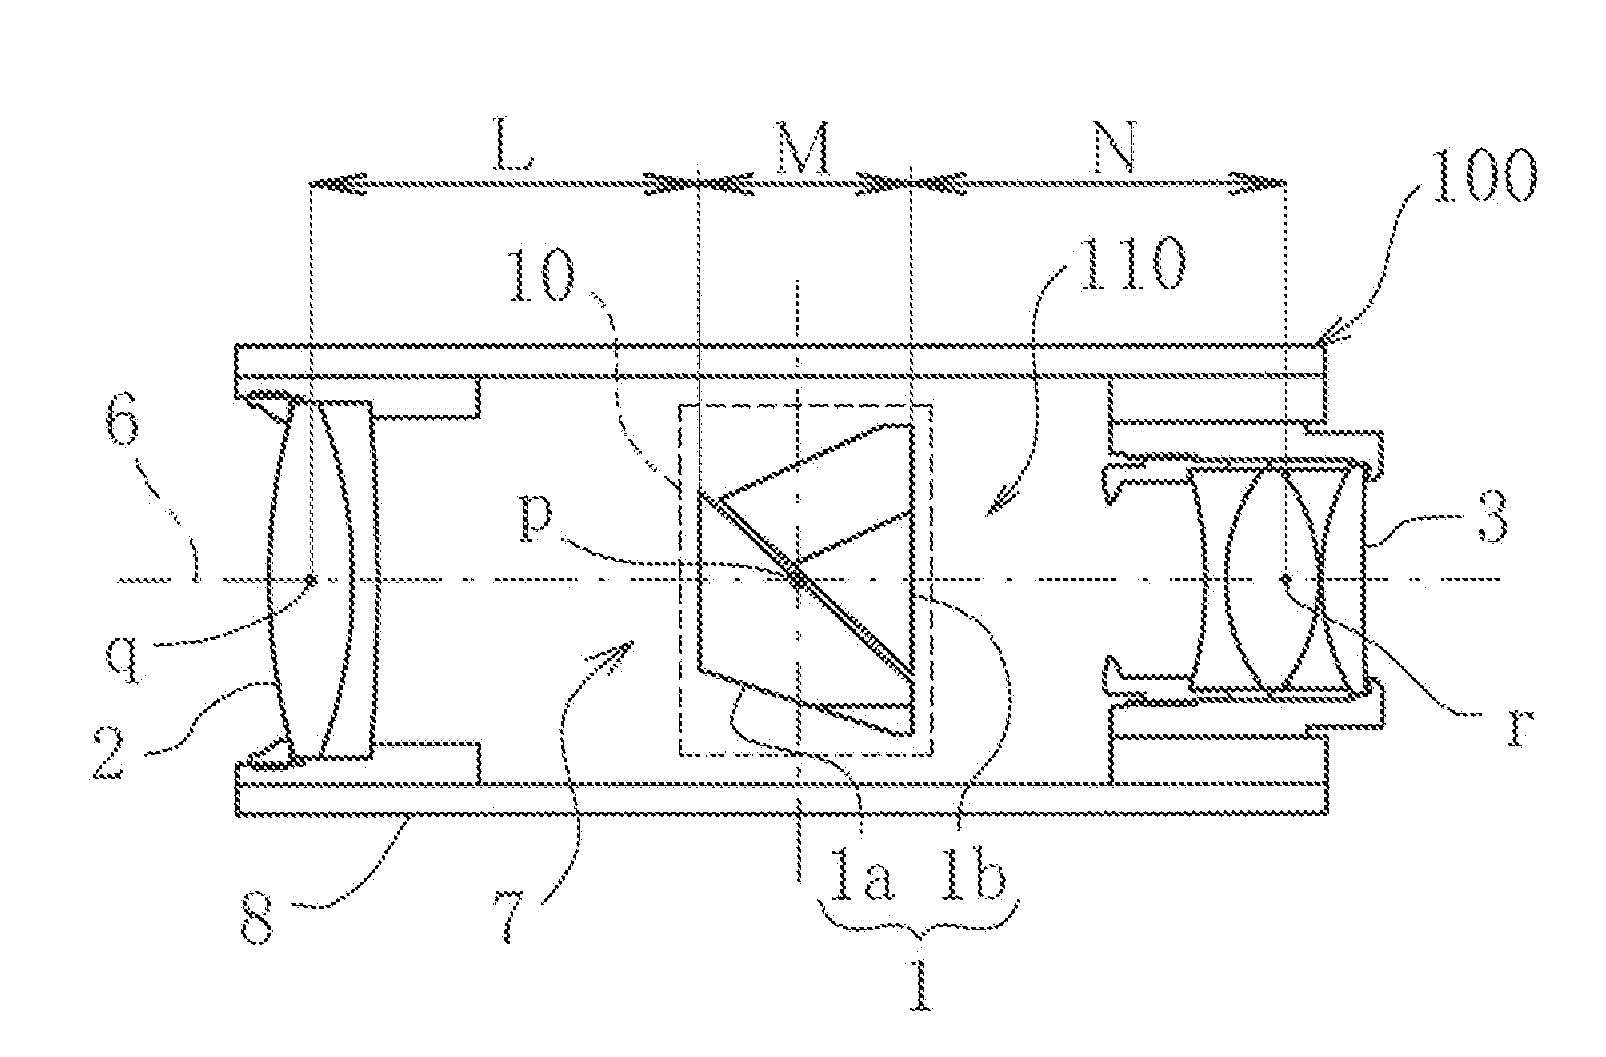 Image stabilizing device and system for telescopic optical instruments